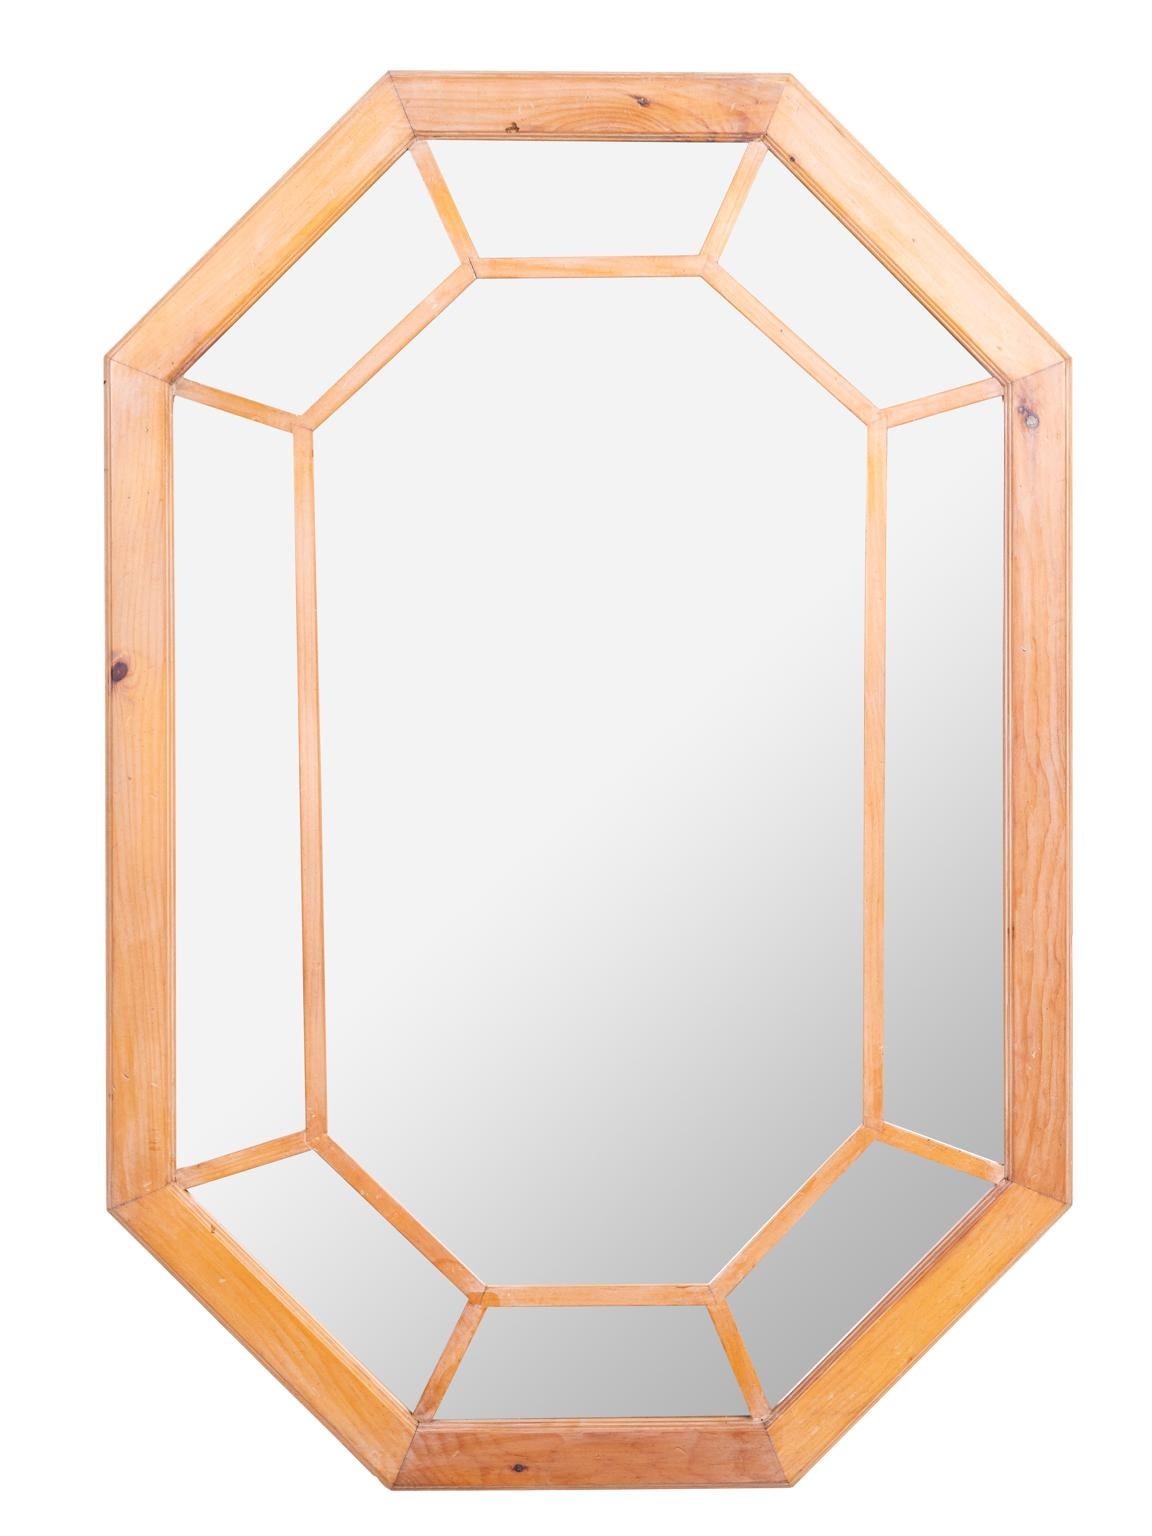 Carvers guild stripped pine octagon shape mirror. Has a nice vintage look of English scrubbed pine, with wax finish. Makers label on back. Made in USA.